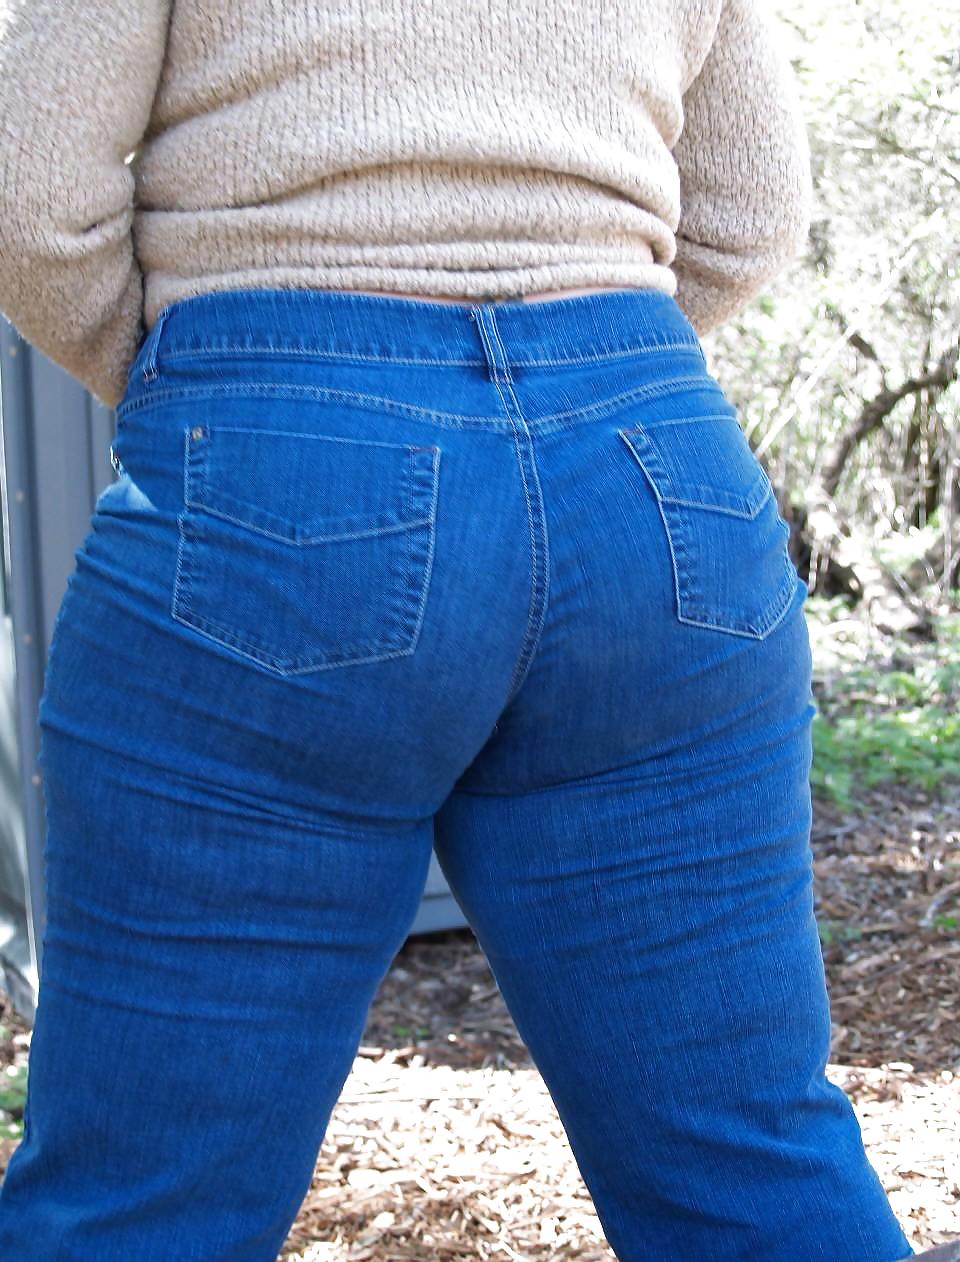 BBW in Tight Jeans! Collection #4 #19076714